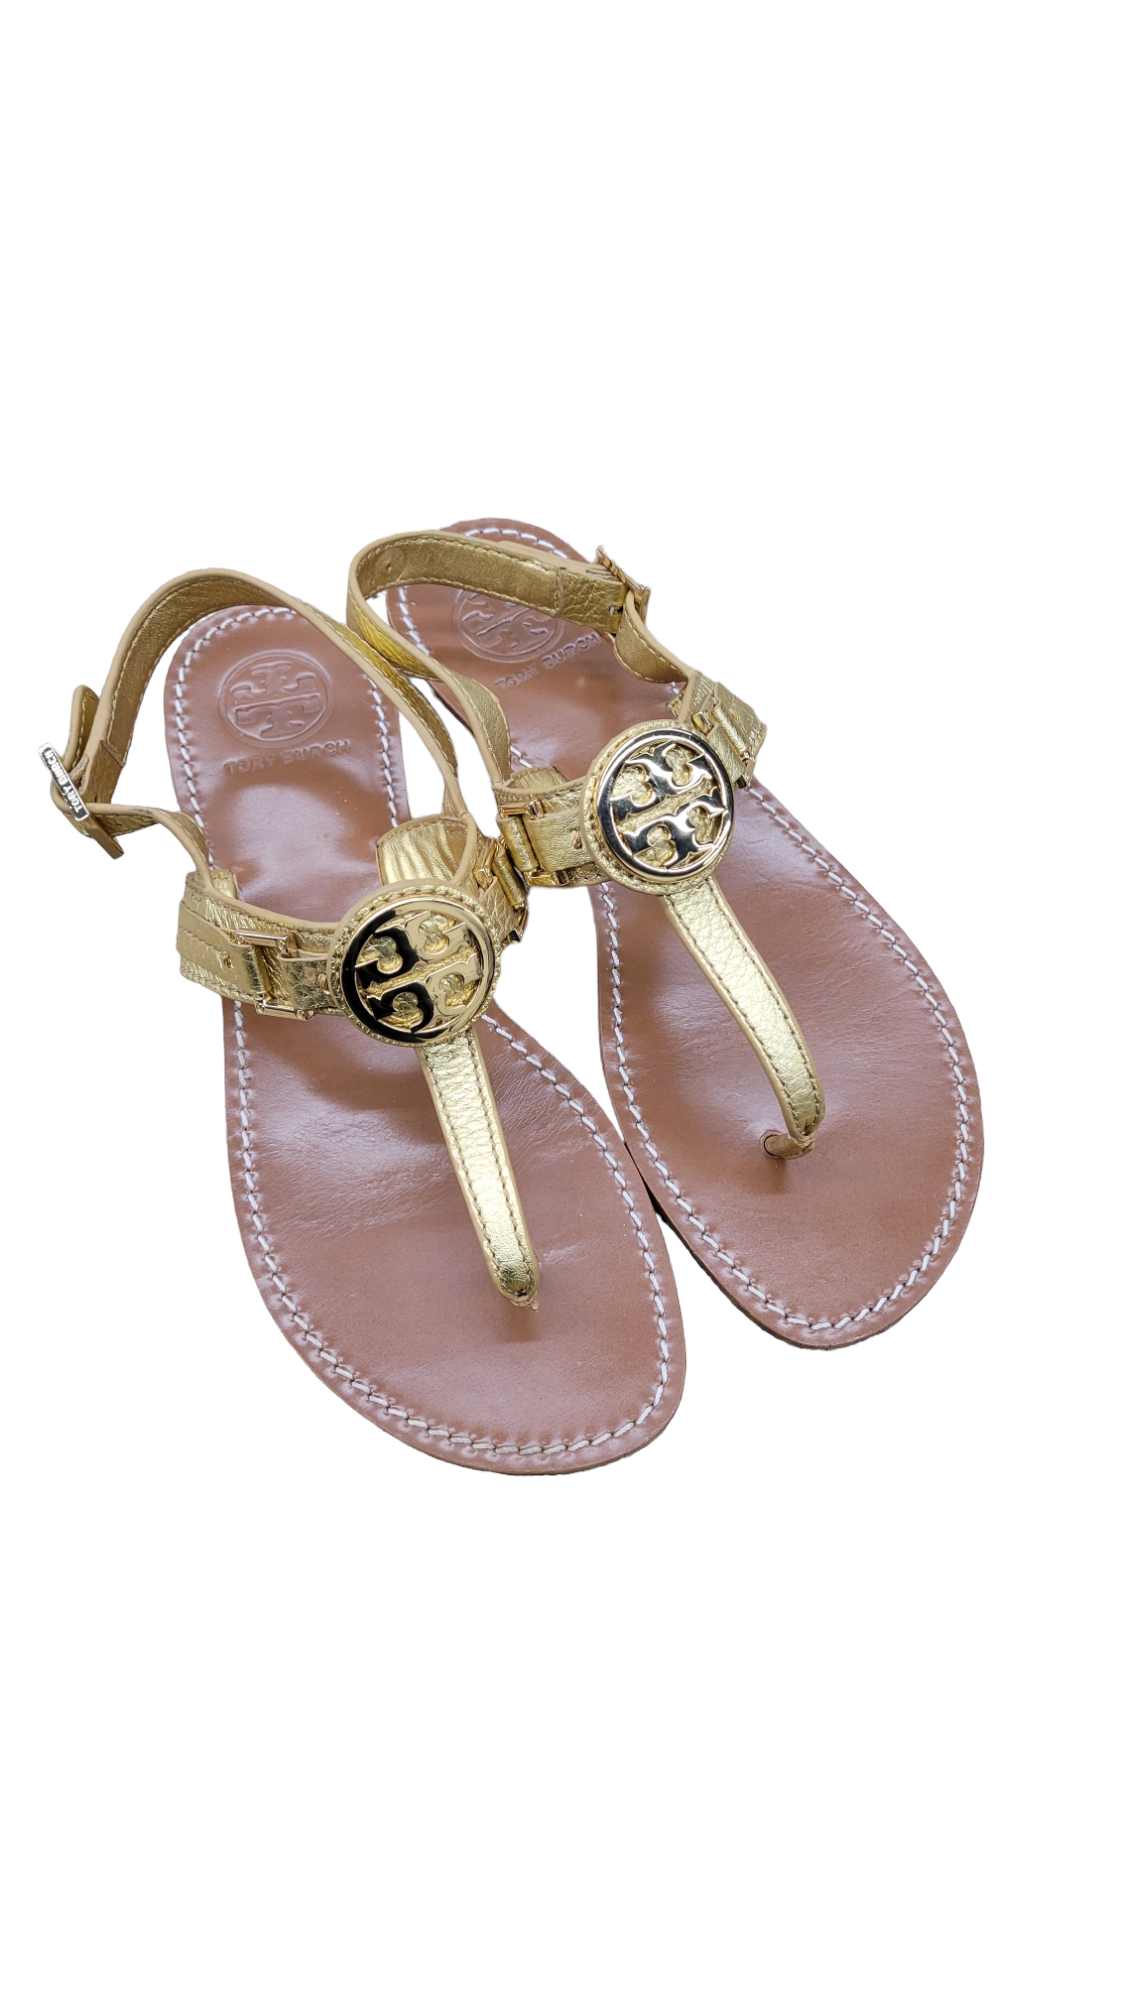 Tory Burch sandals size  